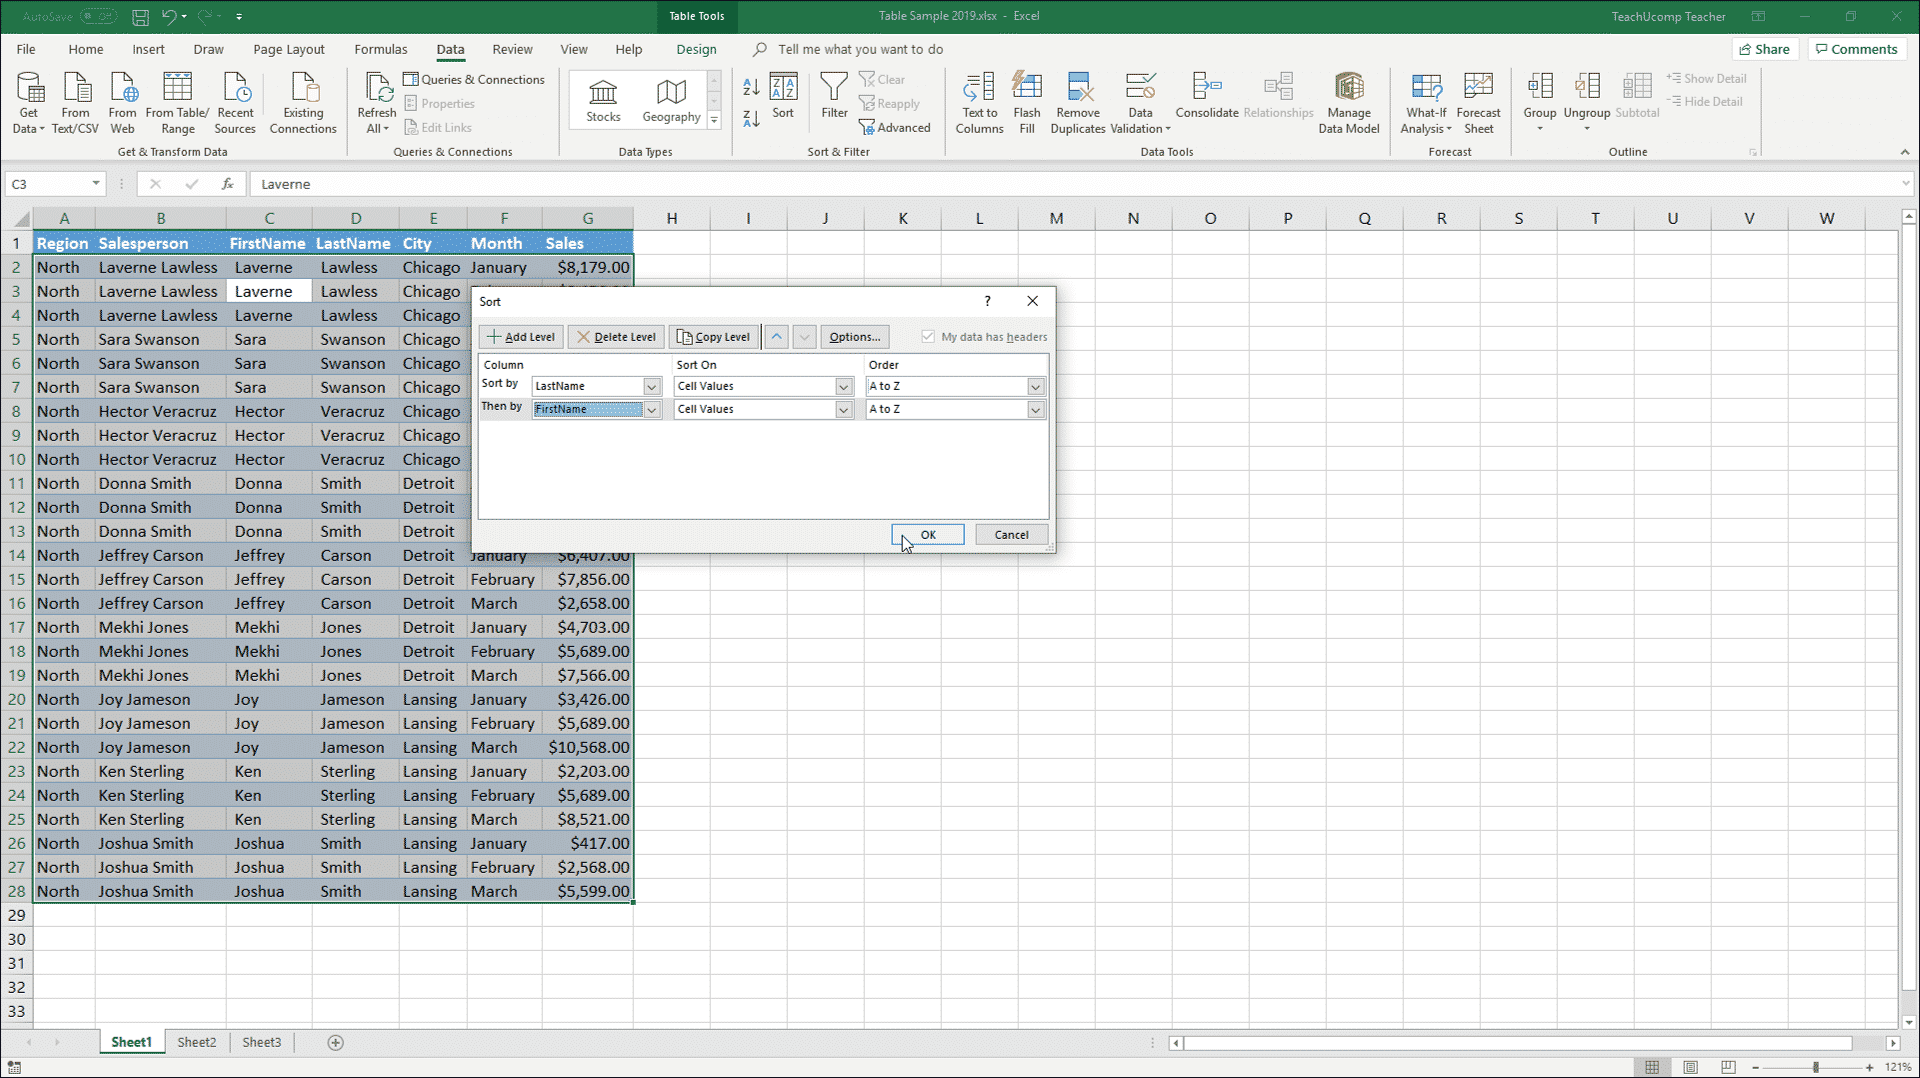 How to Sort a Table in Excel?